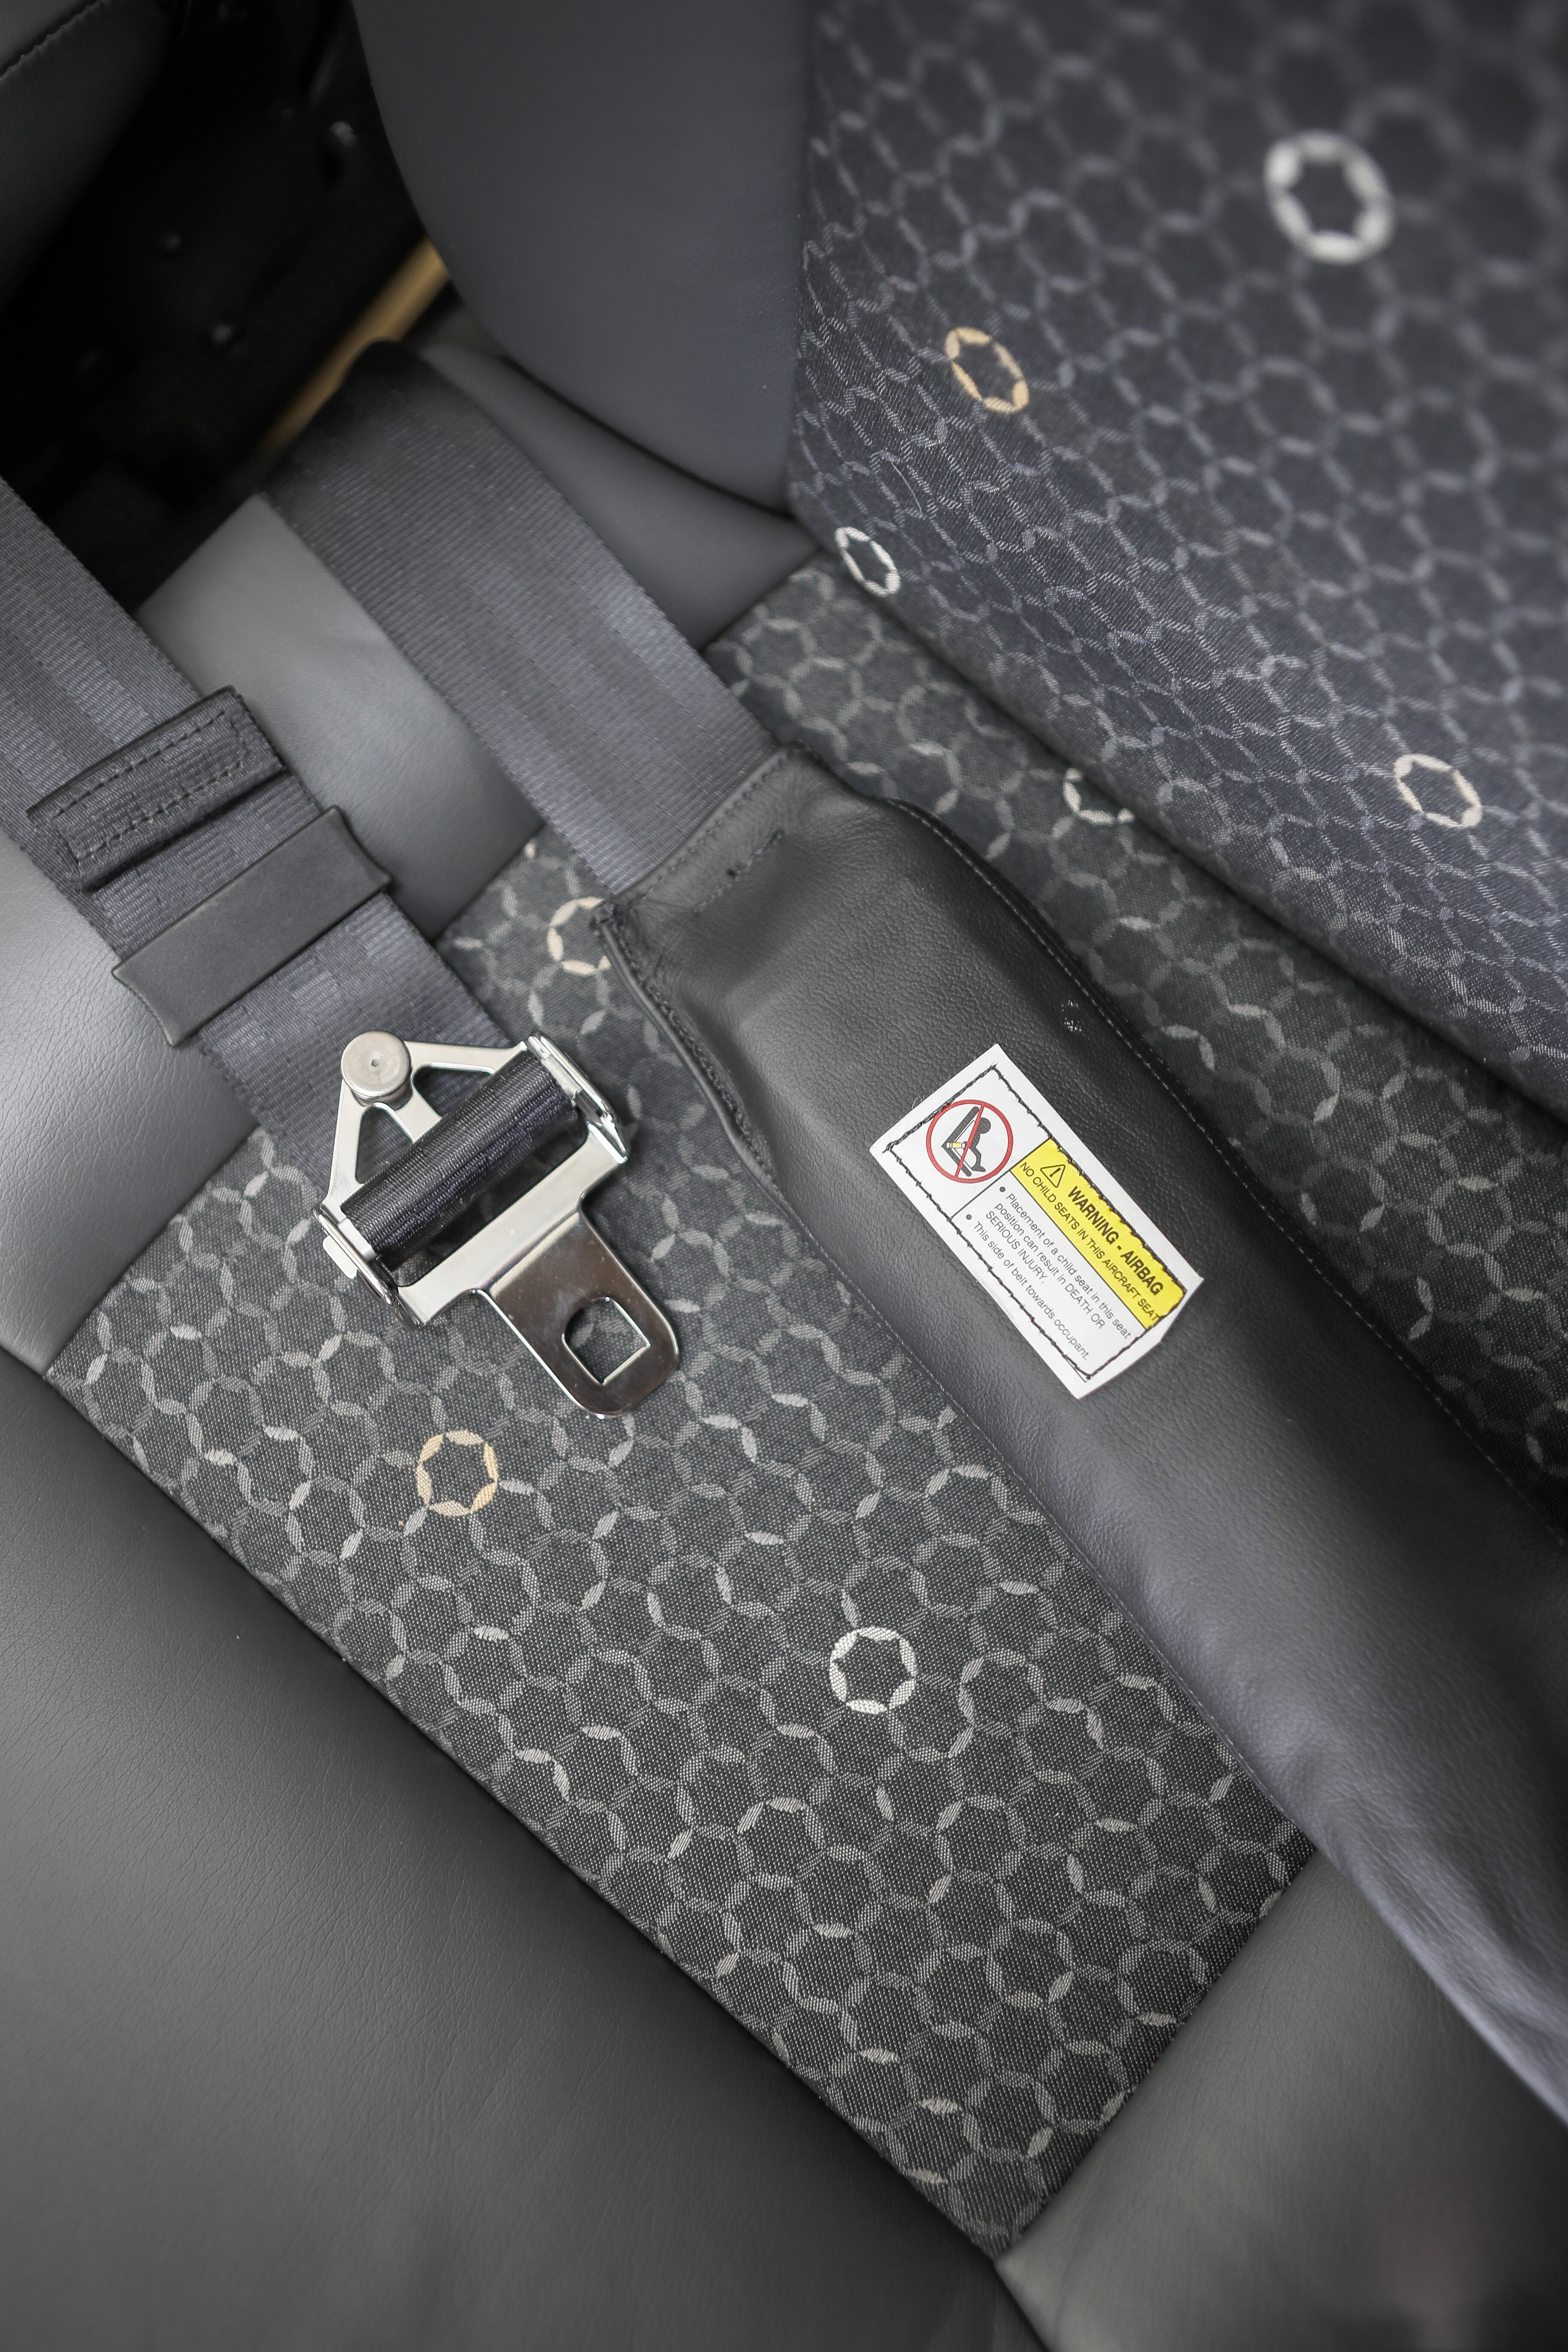 Airbag seatbelts provided by AmSafe.